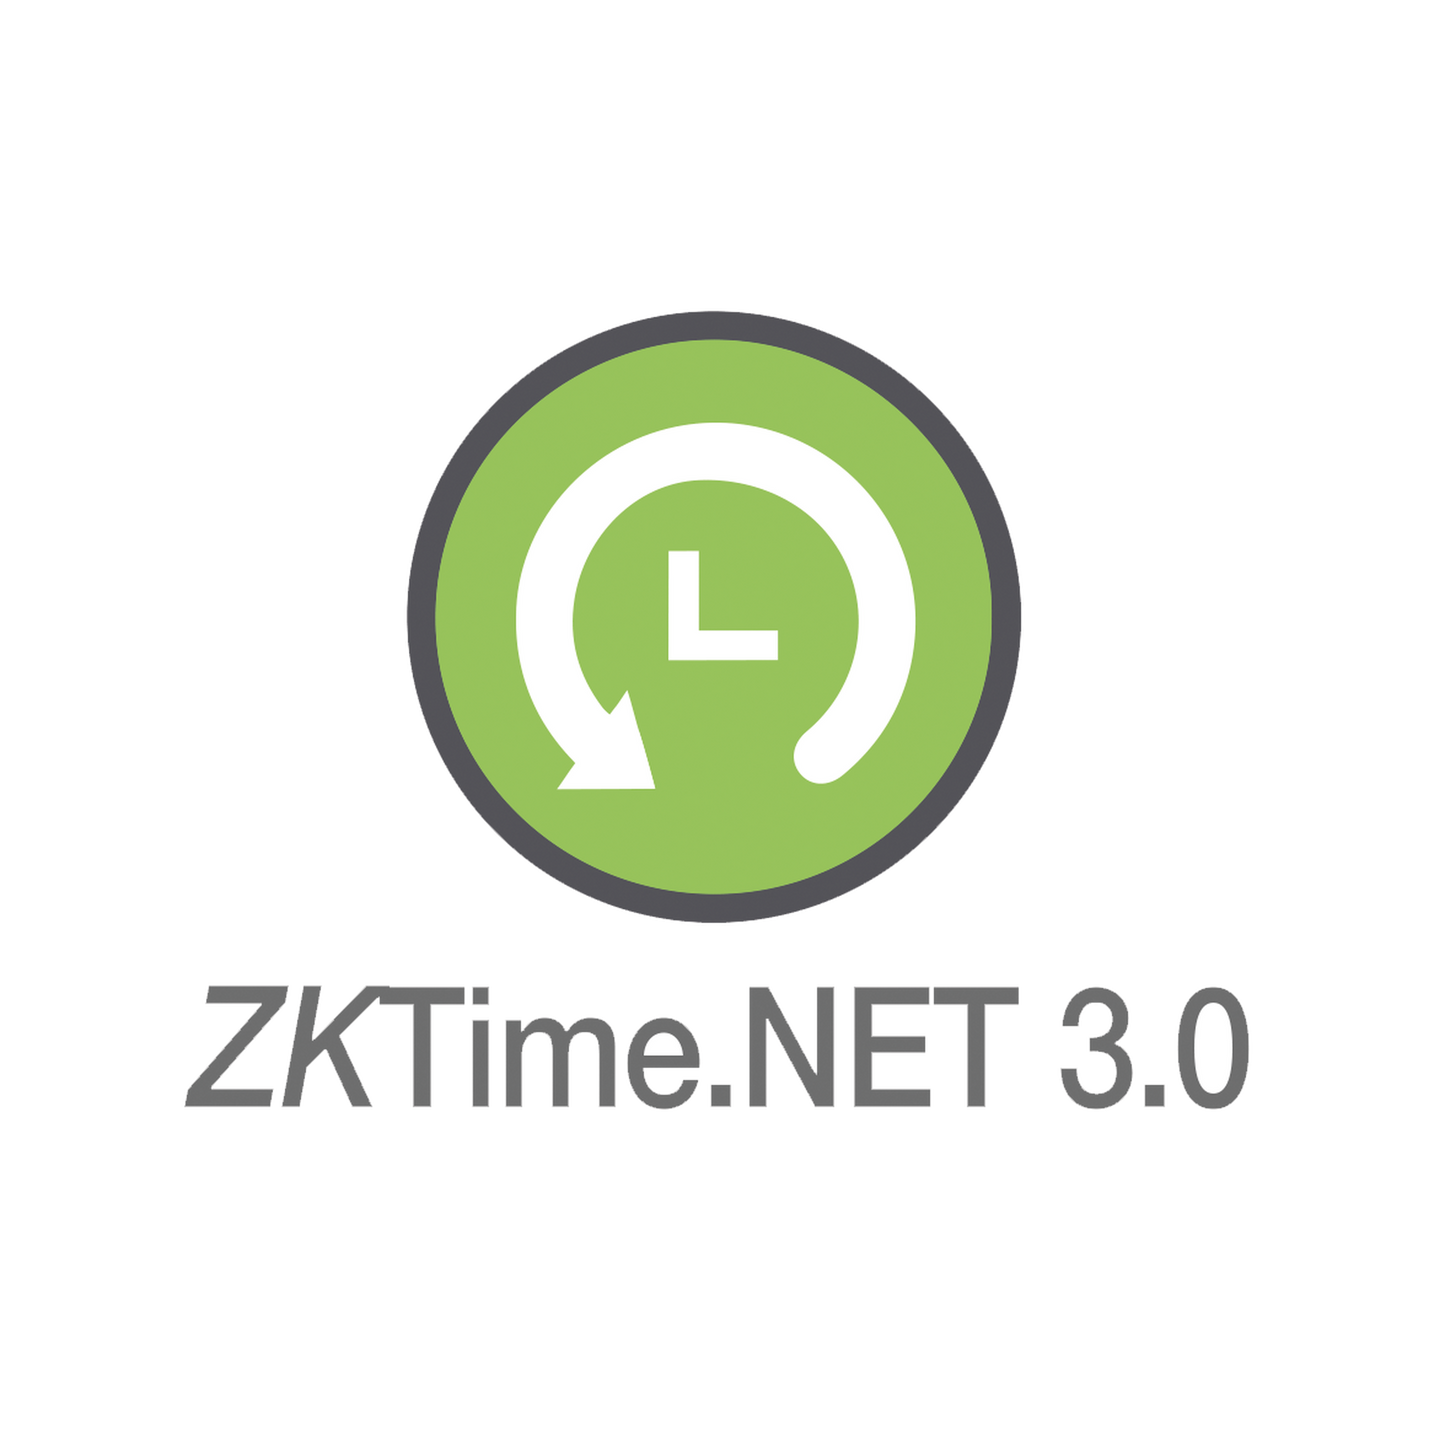 ZK TimeNet 3.0 Economic. Up to 500 users